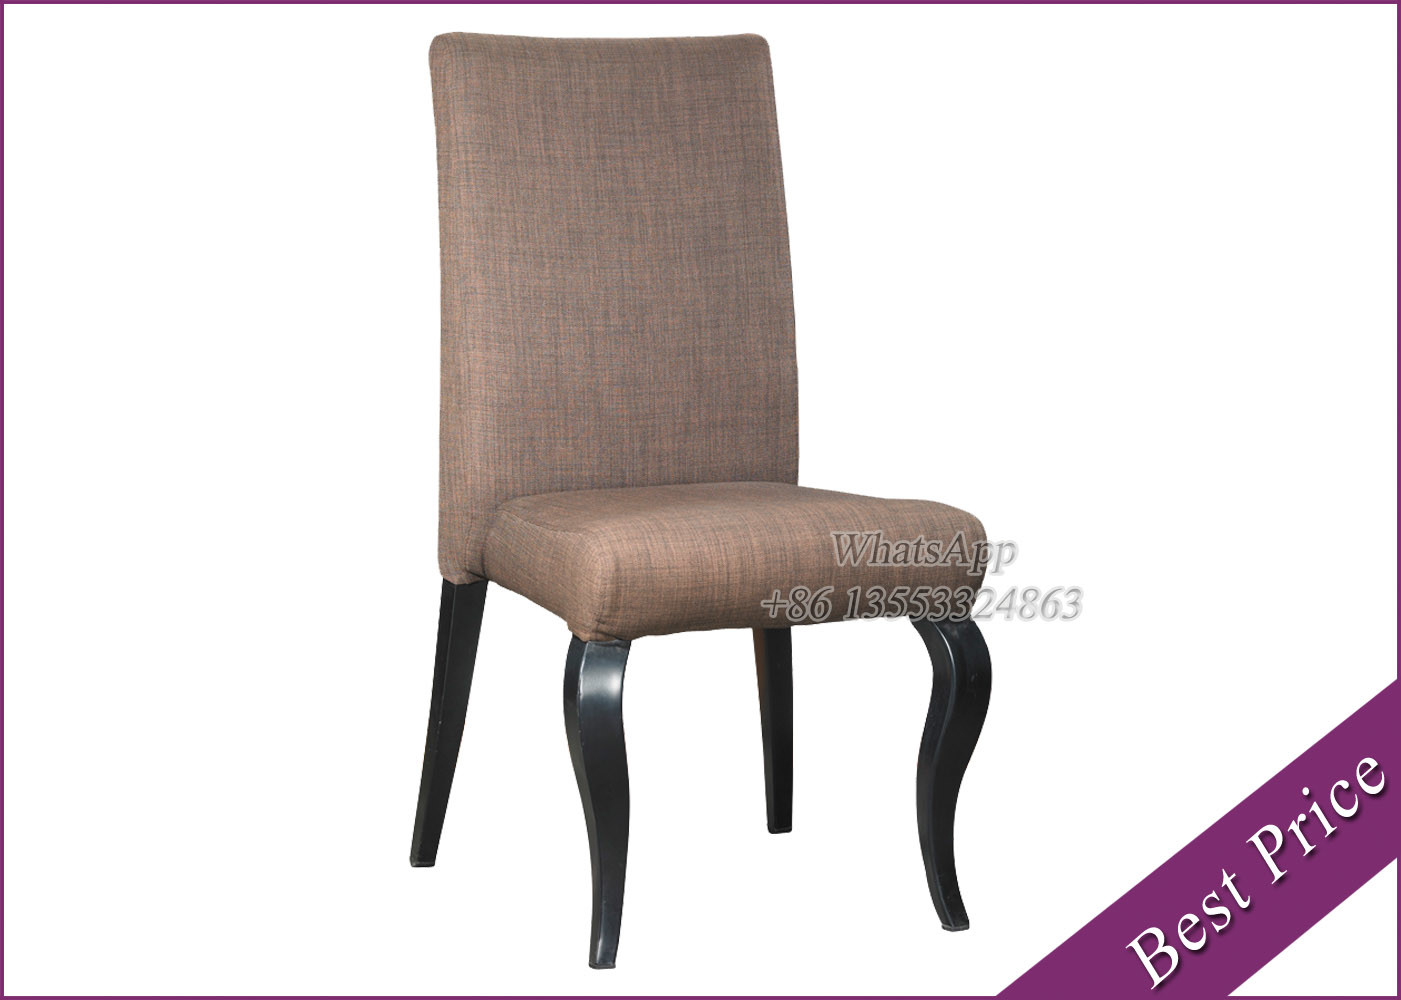 Commercial Furniture Factory Dining Chairs Metal Leg For Sale (YA-35)